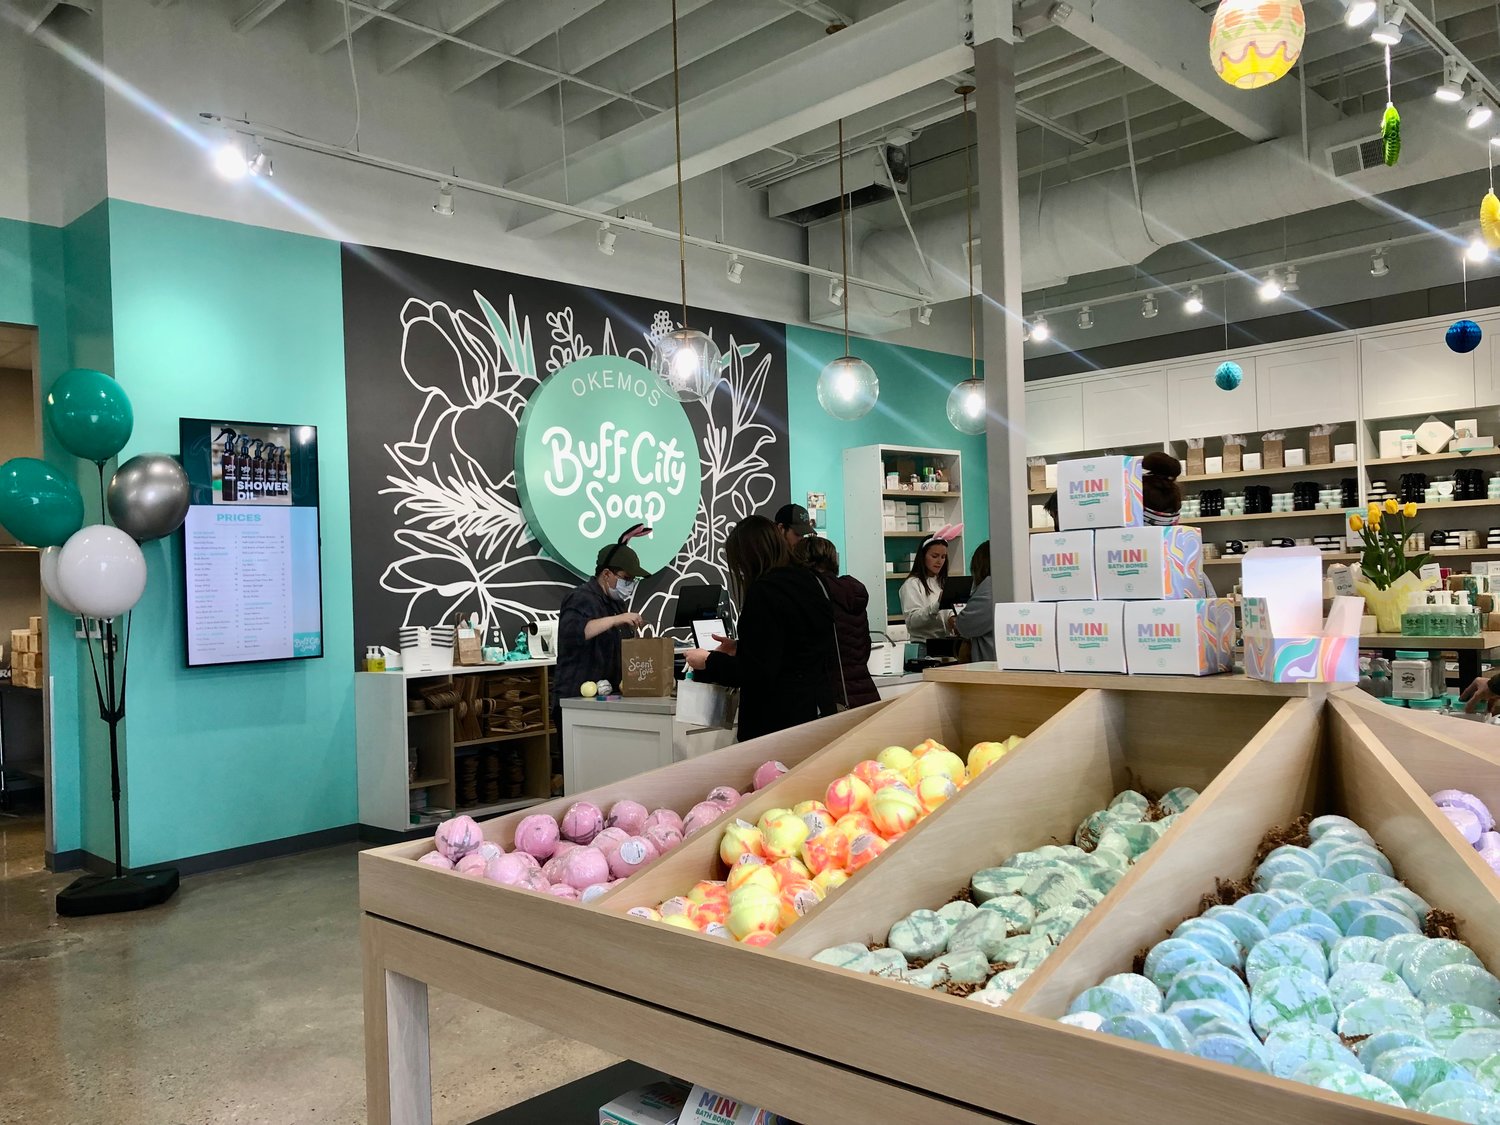 Buff City Soap specializes in handmade, plant-based bath and laundry products.